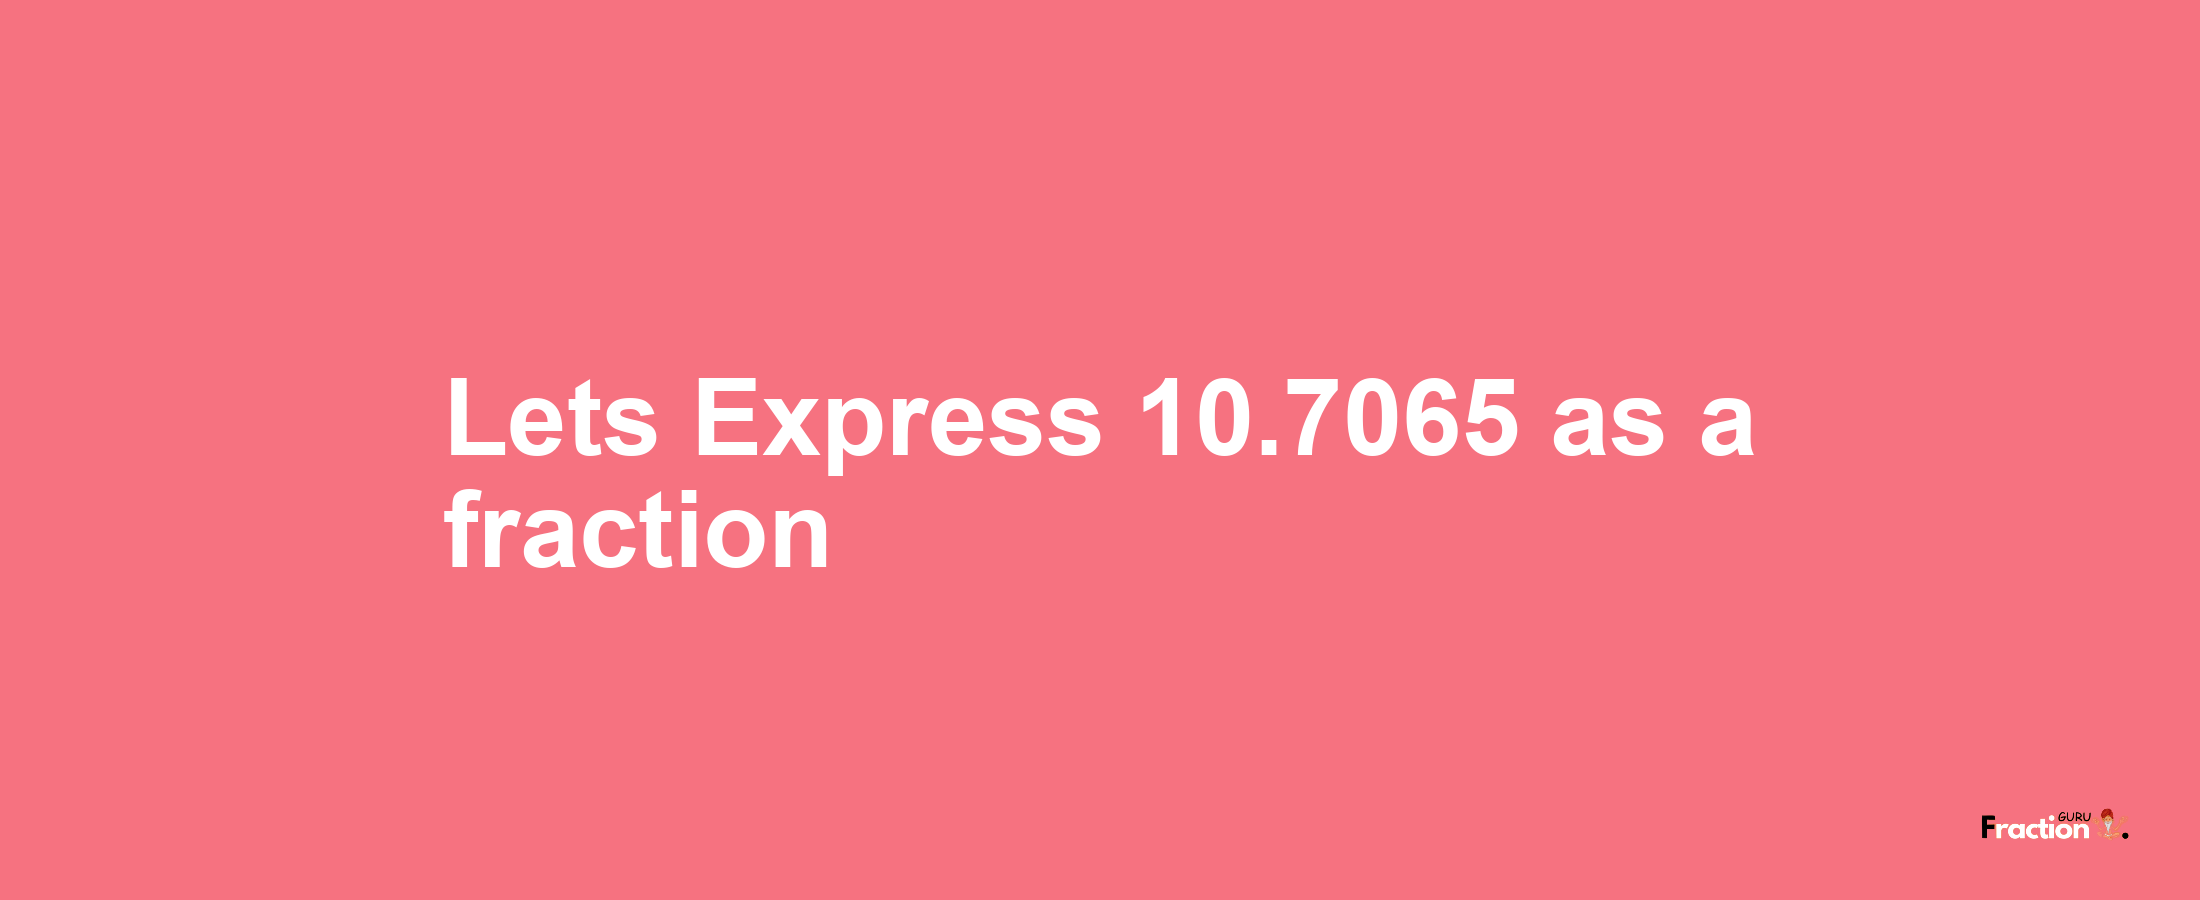 Lets Express 10.7065 as afraction